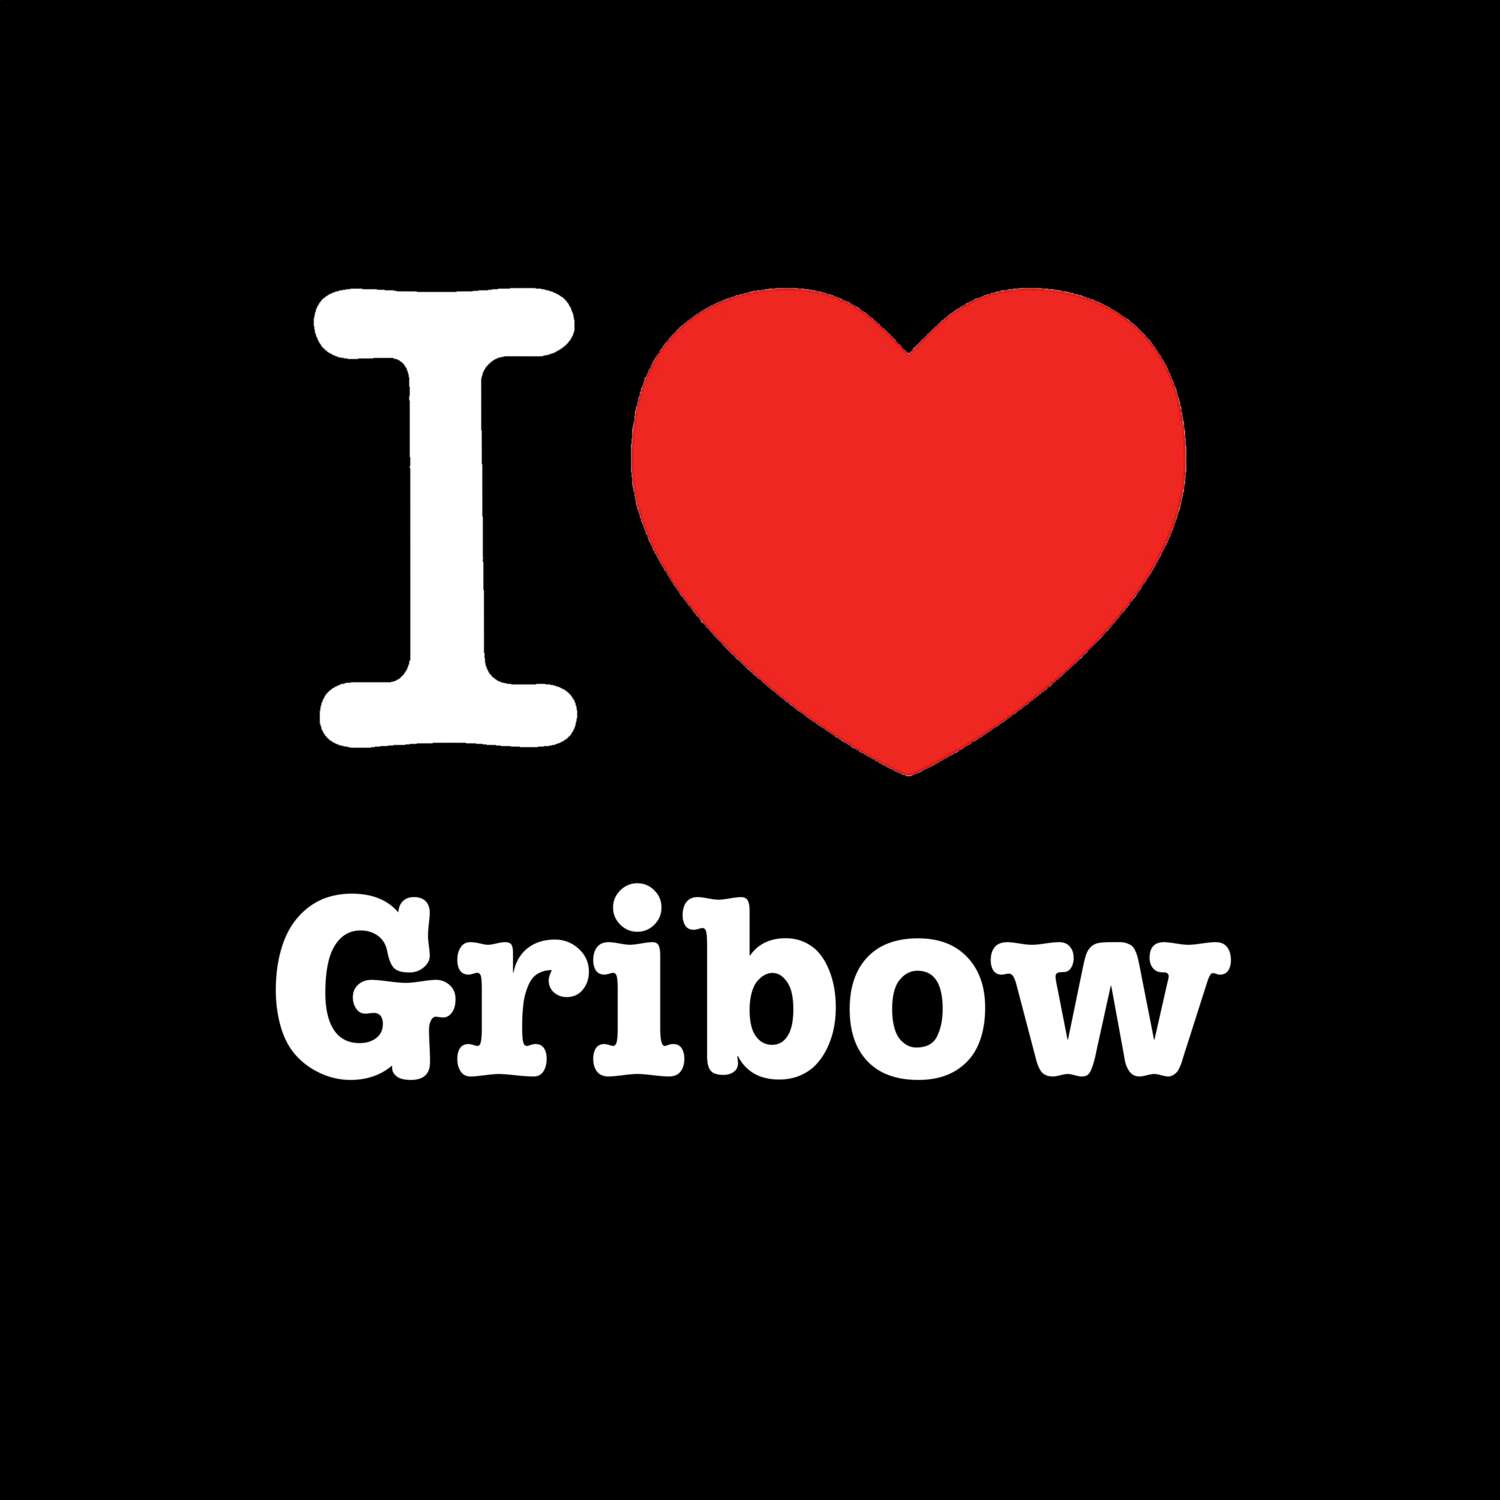 Gribow T-Shirt »I love«